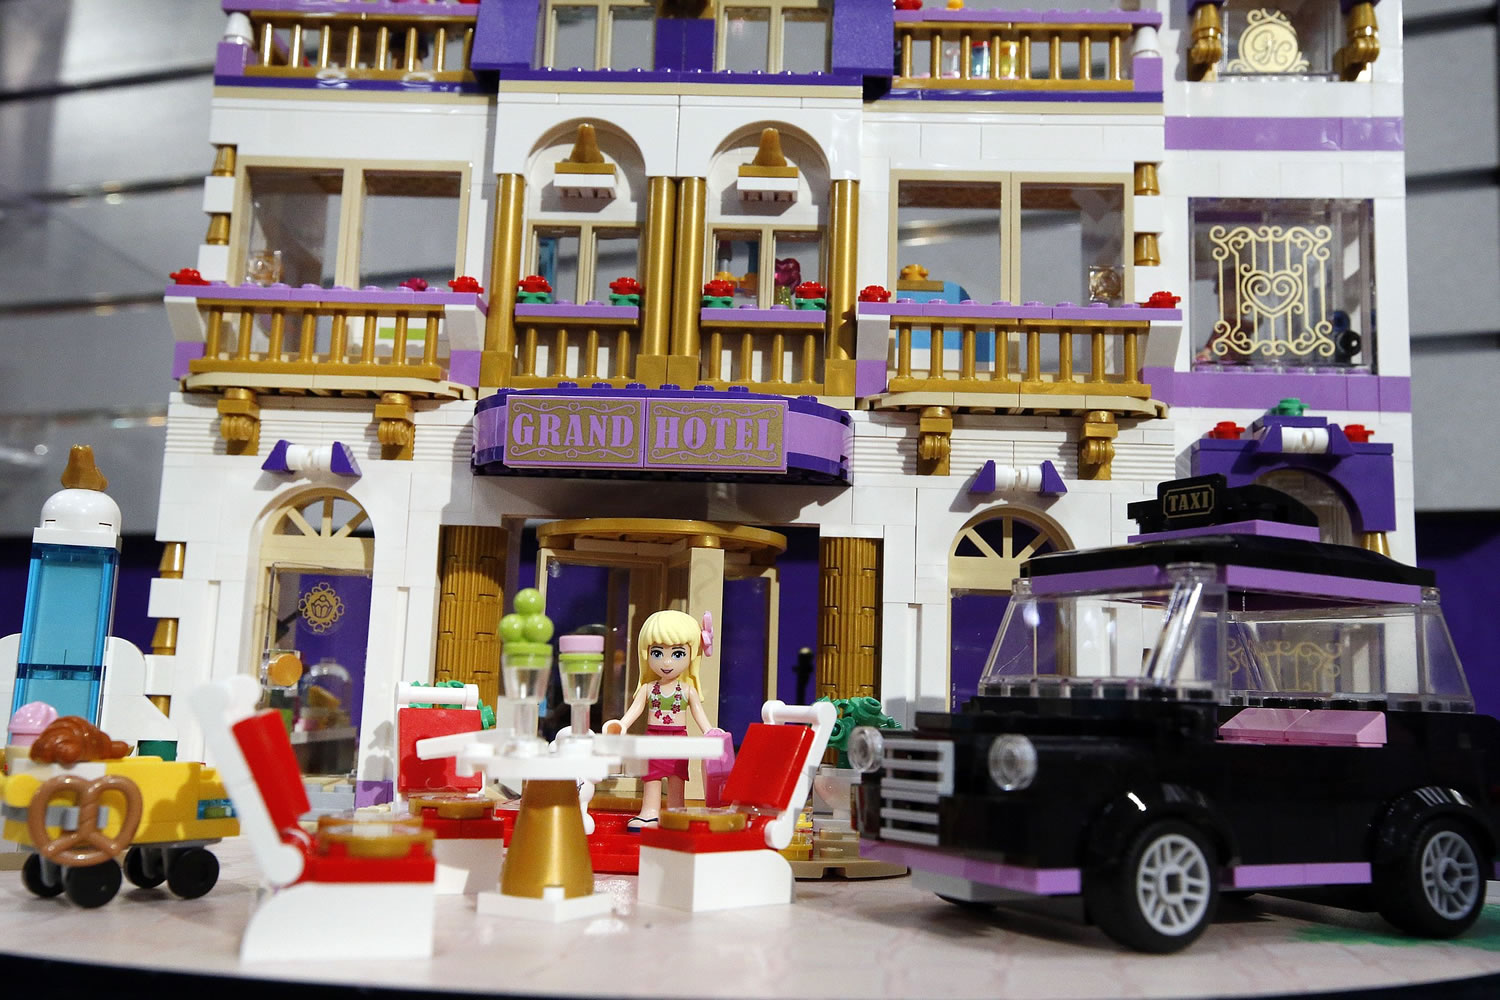 IMAGE DISTRIBUTED FOR LEGO SYSTEMS - The LEGO Friends Heartlake Grand Hotel set is displayed at the American International Toy Fair, Saturday, Feb. 14, 2015, in New York.